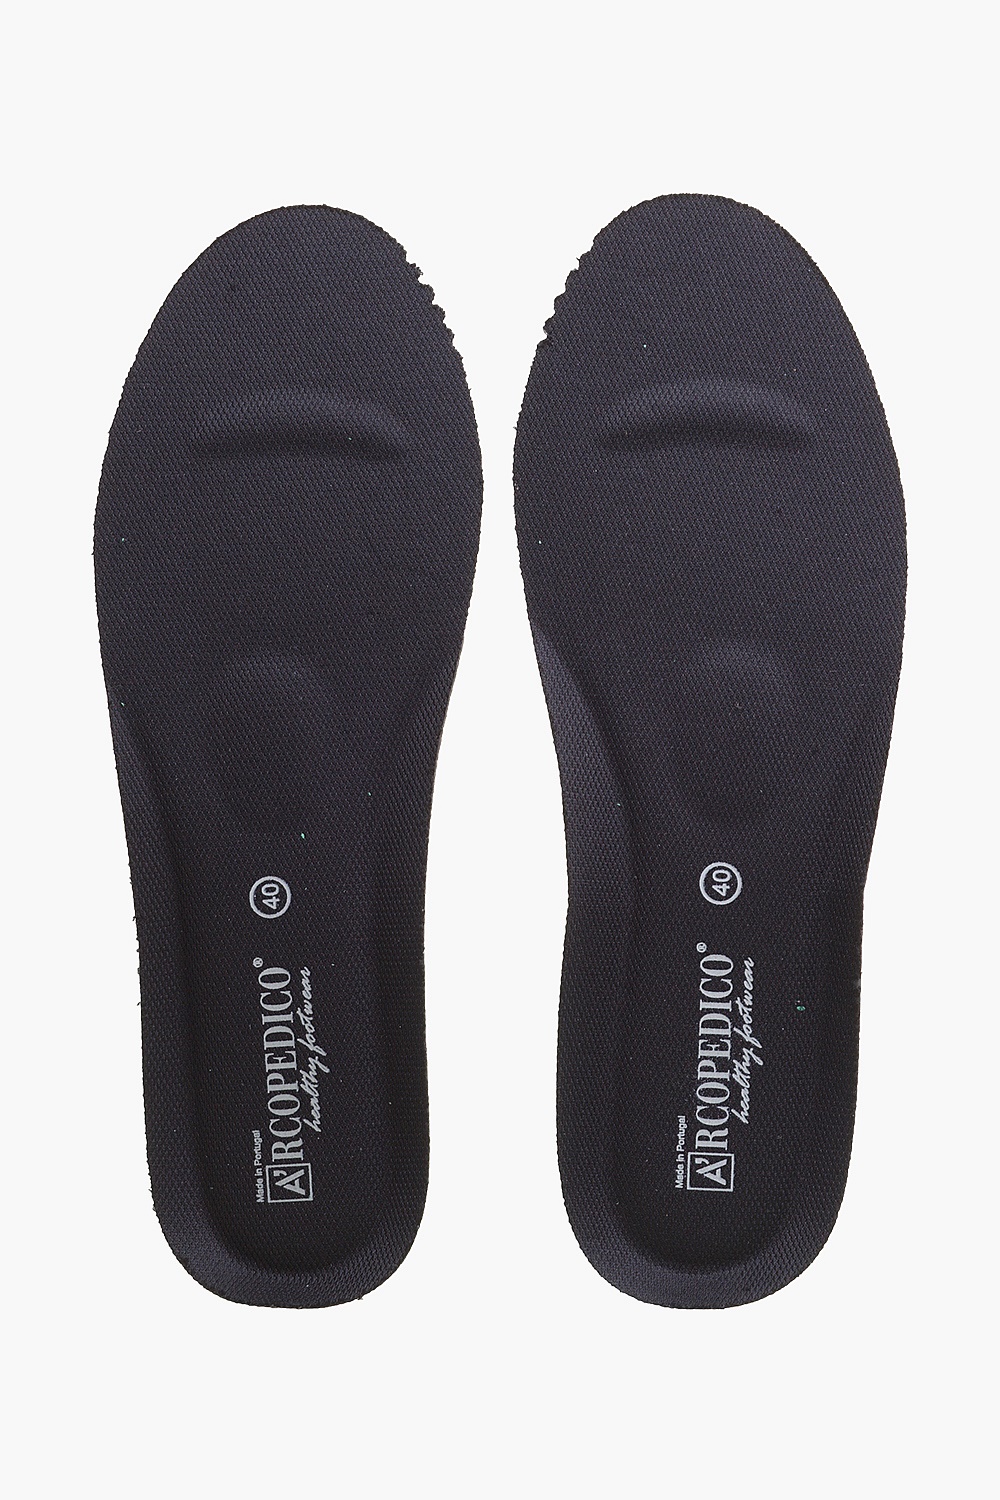 All Women's - Insoles